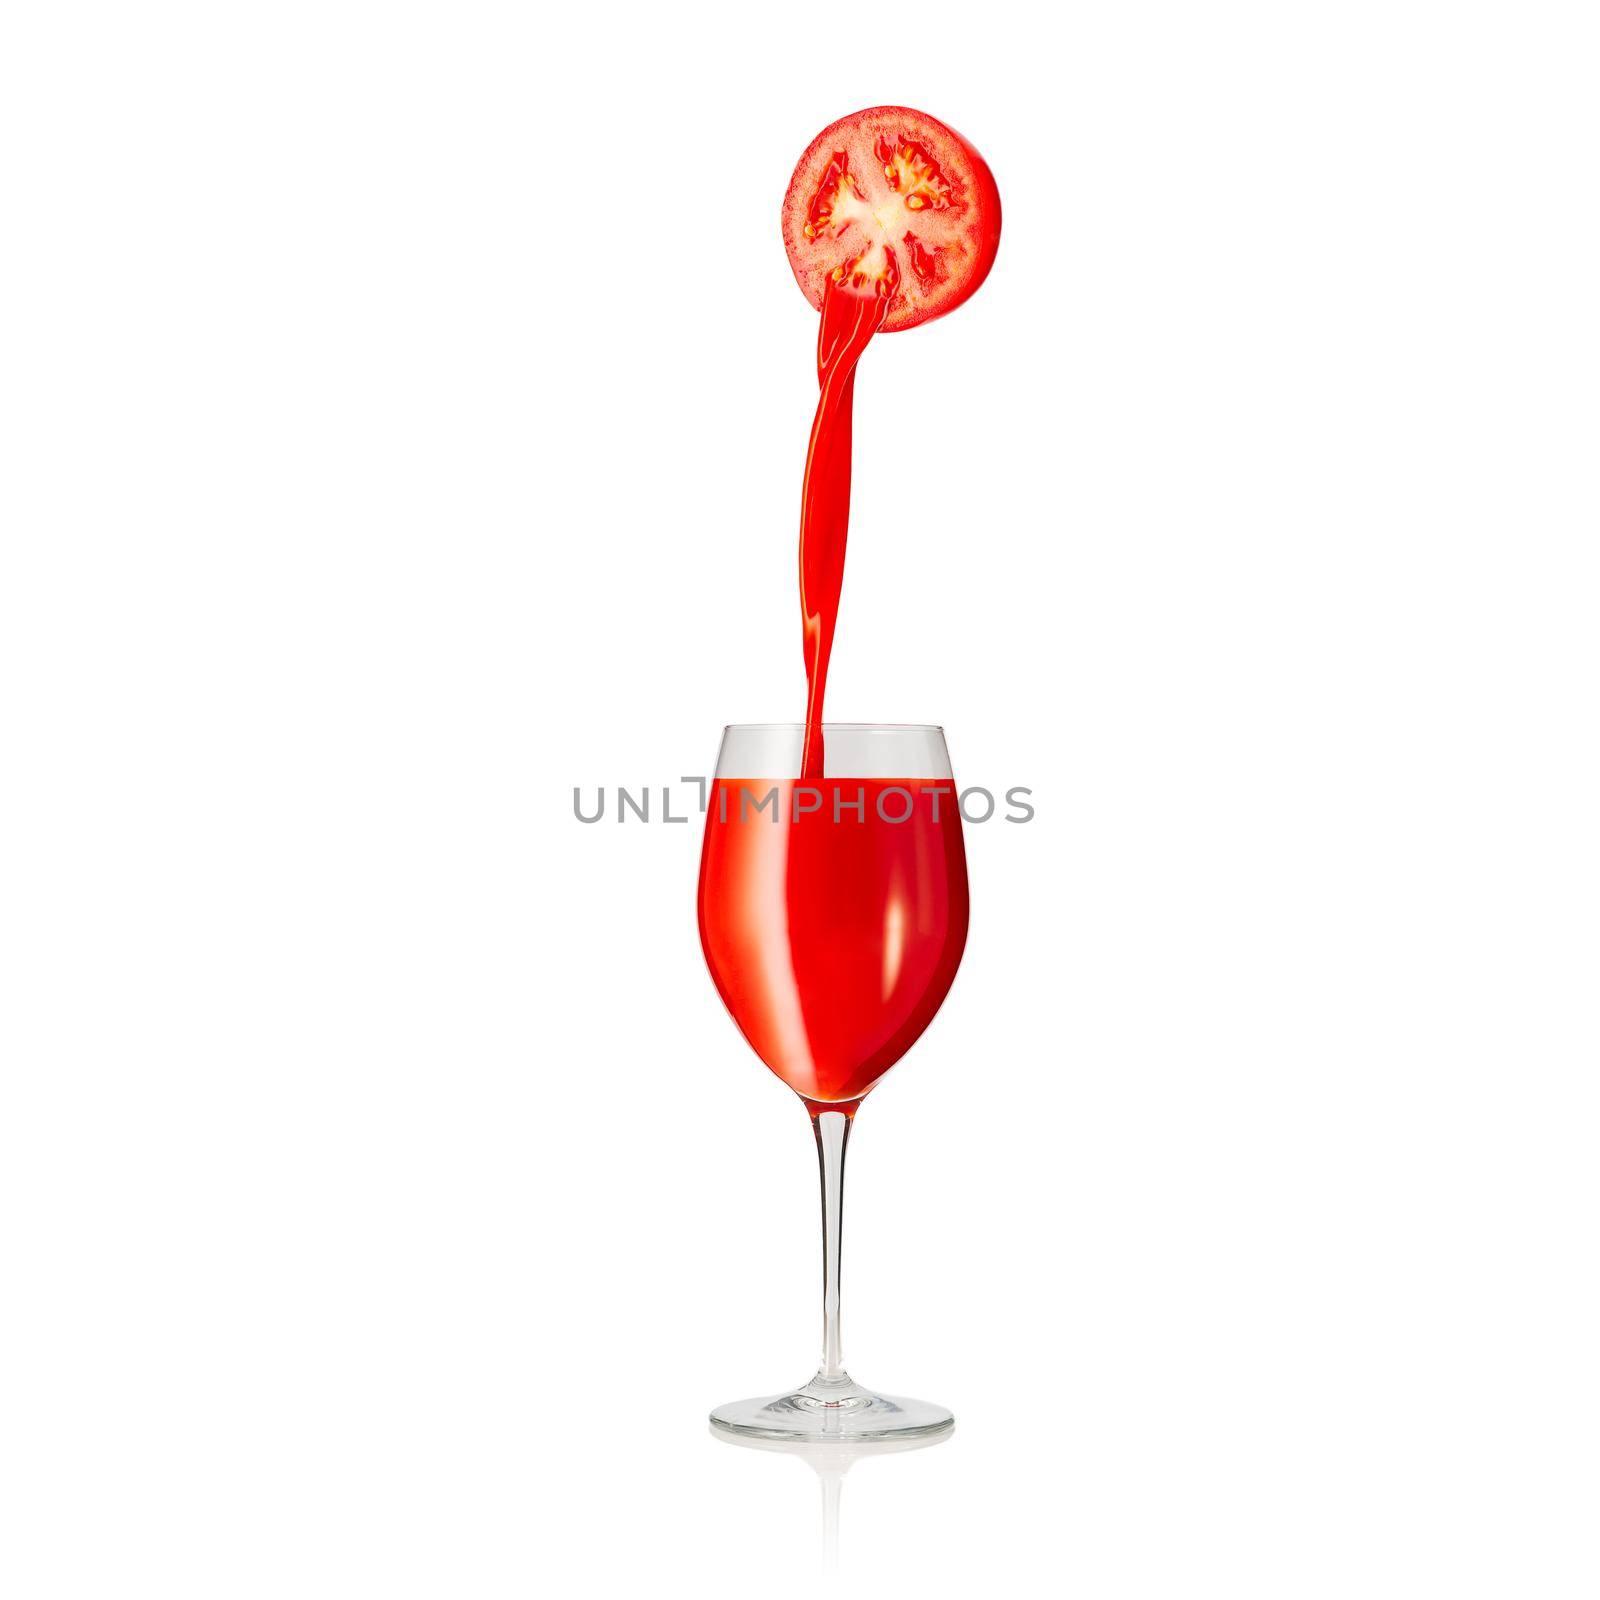 pouring tomato juice to glass isolated on white background. pouring tomato juice from fresh tomato by PhotoTime